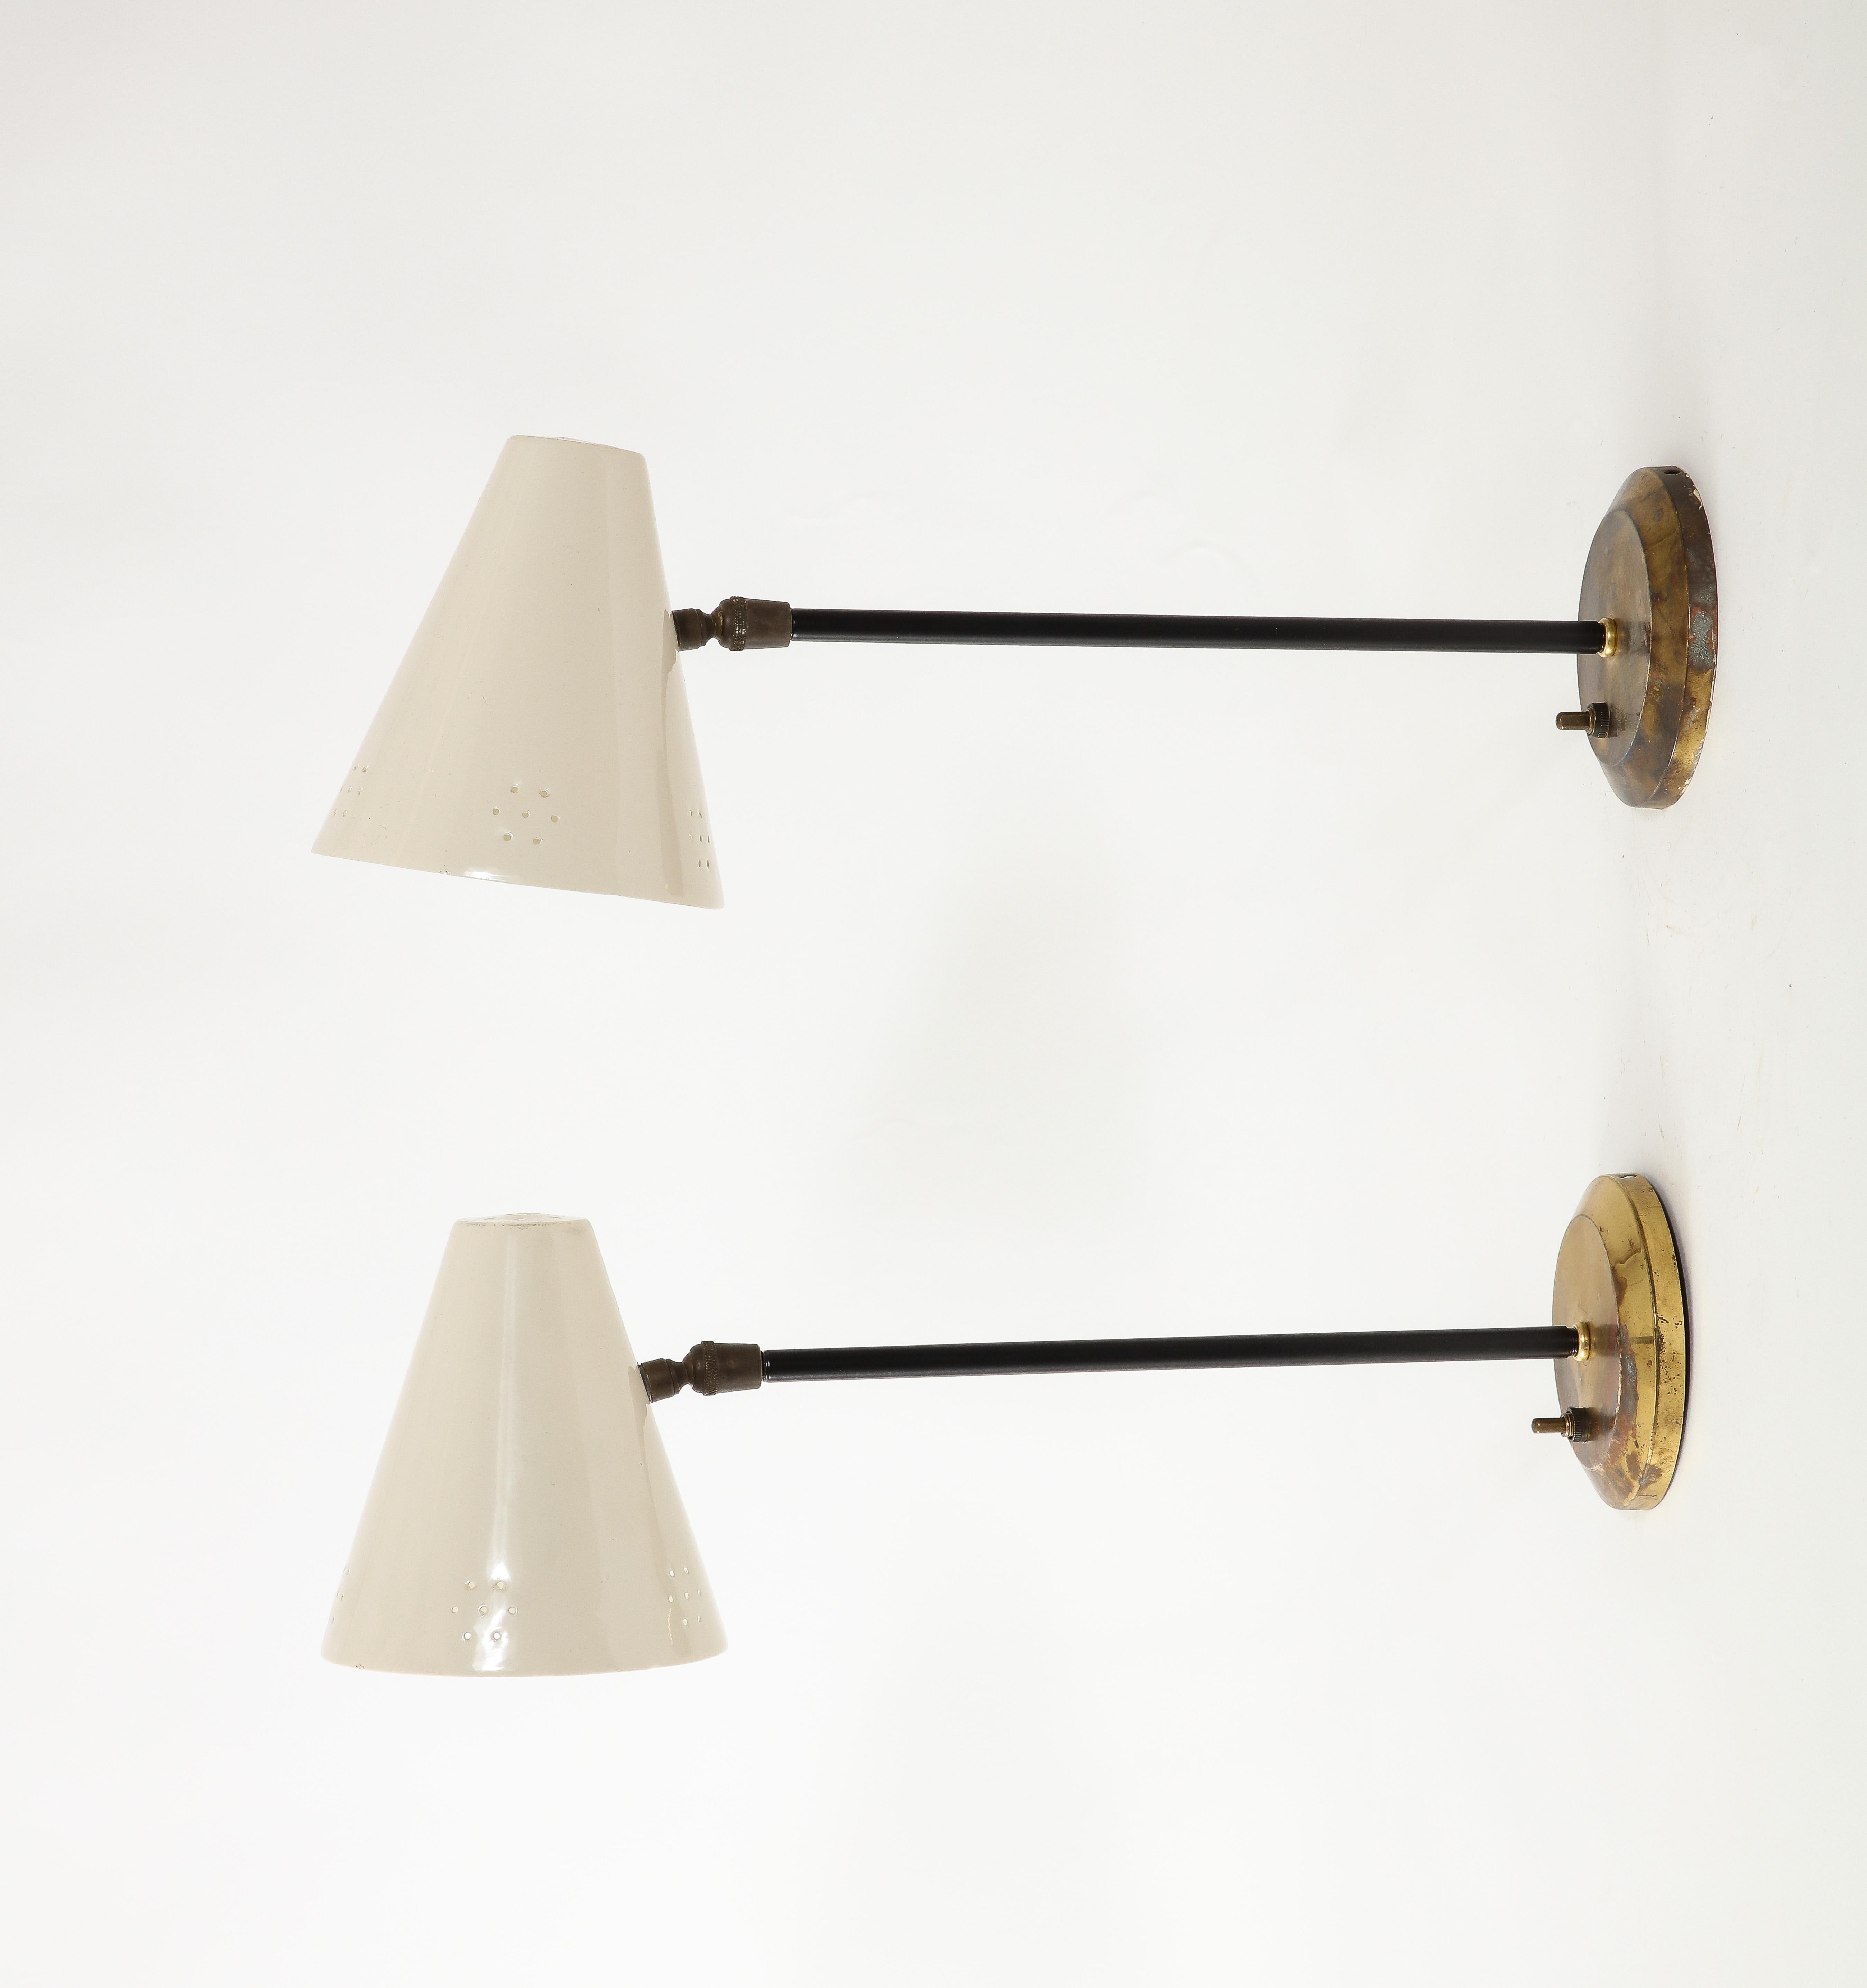 Aluminum & Brass White Wall Sconces, Italy 1960's For Sale 2